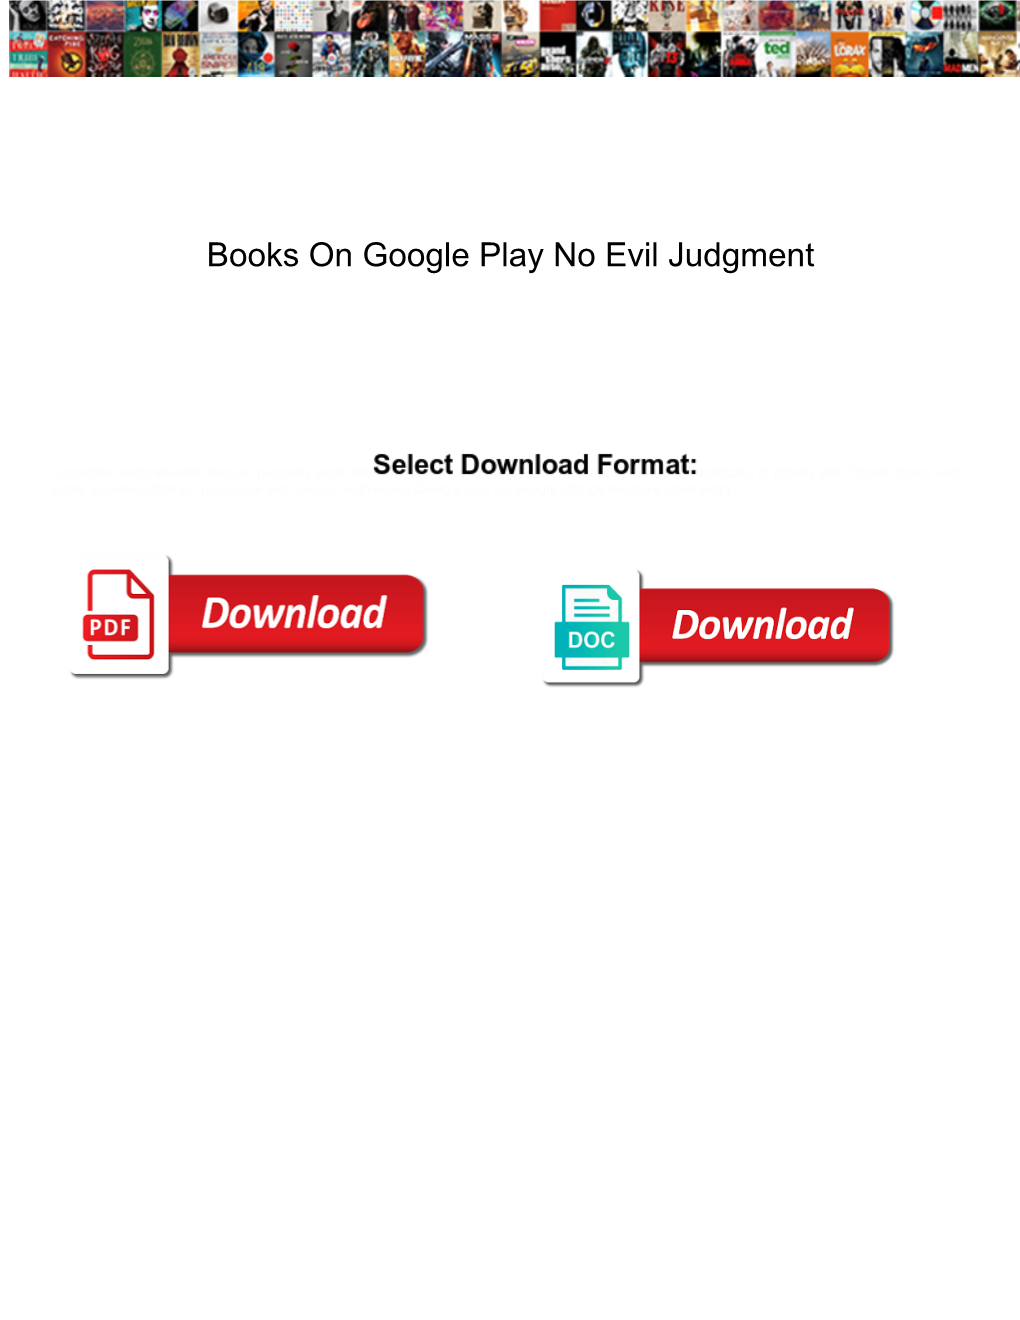 Books on Google Play No Evil Judgment